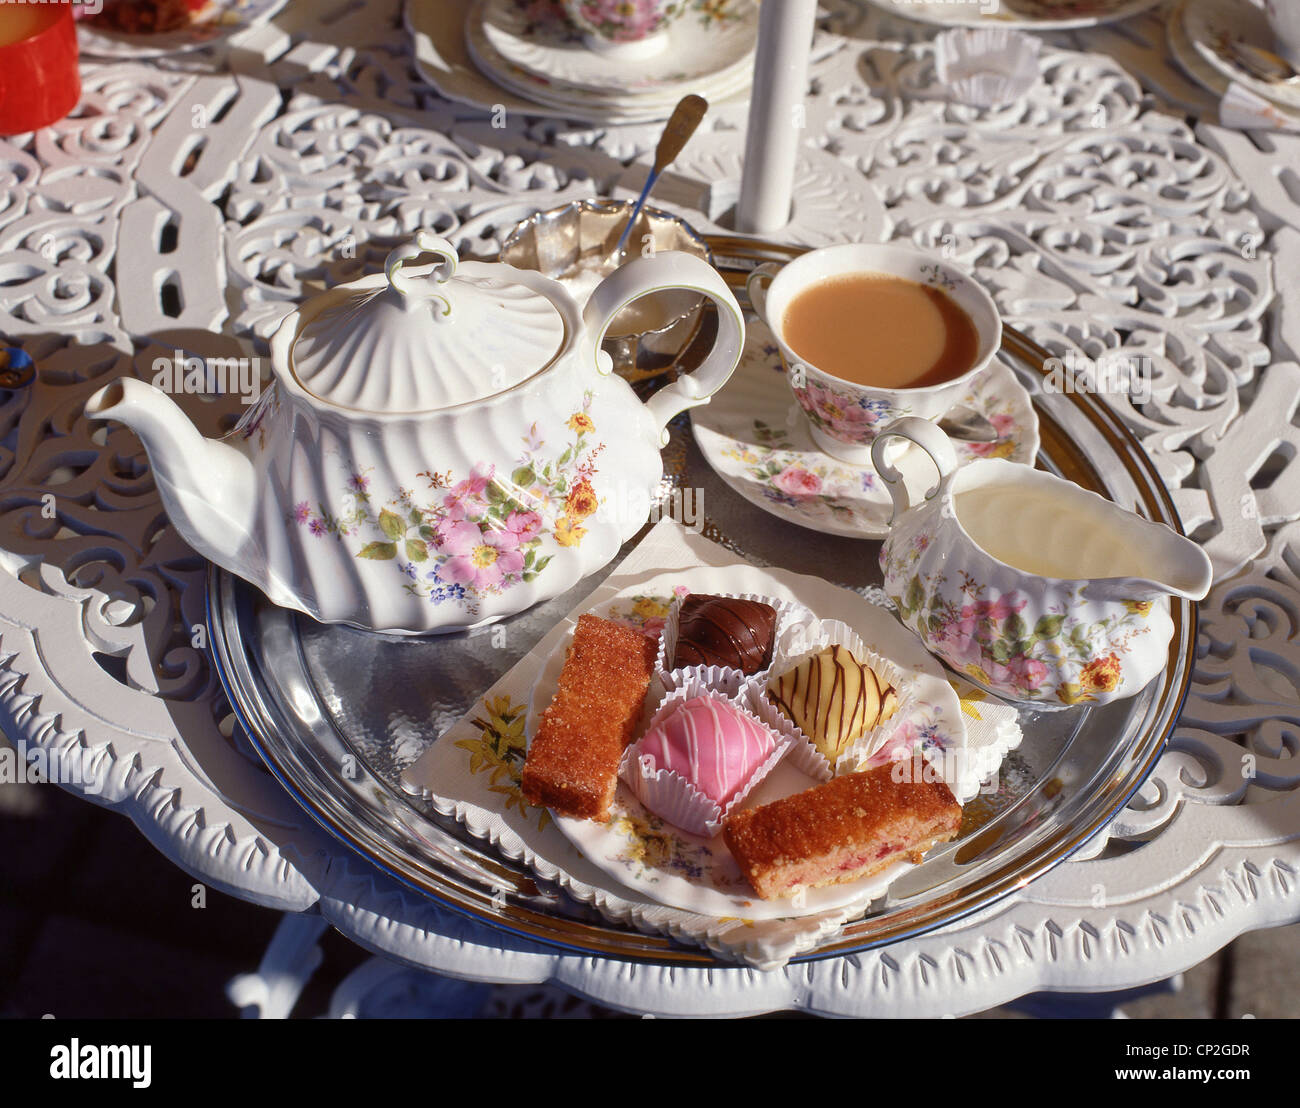 Afternoon tea and cakes in garden, Winkfield, Berkshire, England, United Kingdom Stock Photo